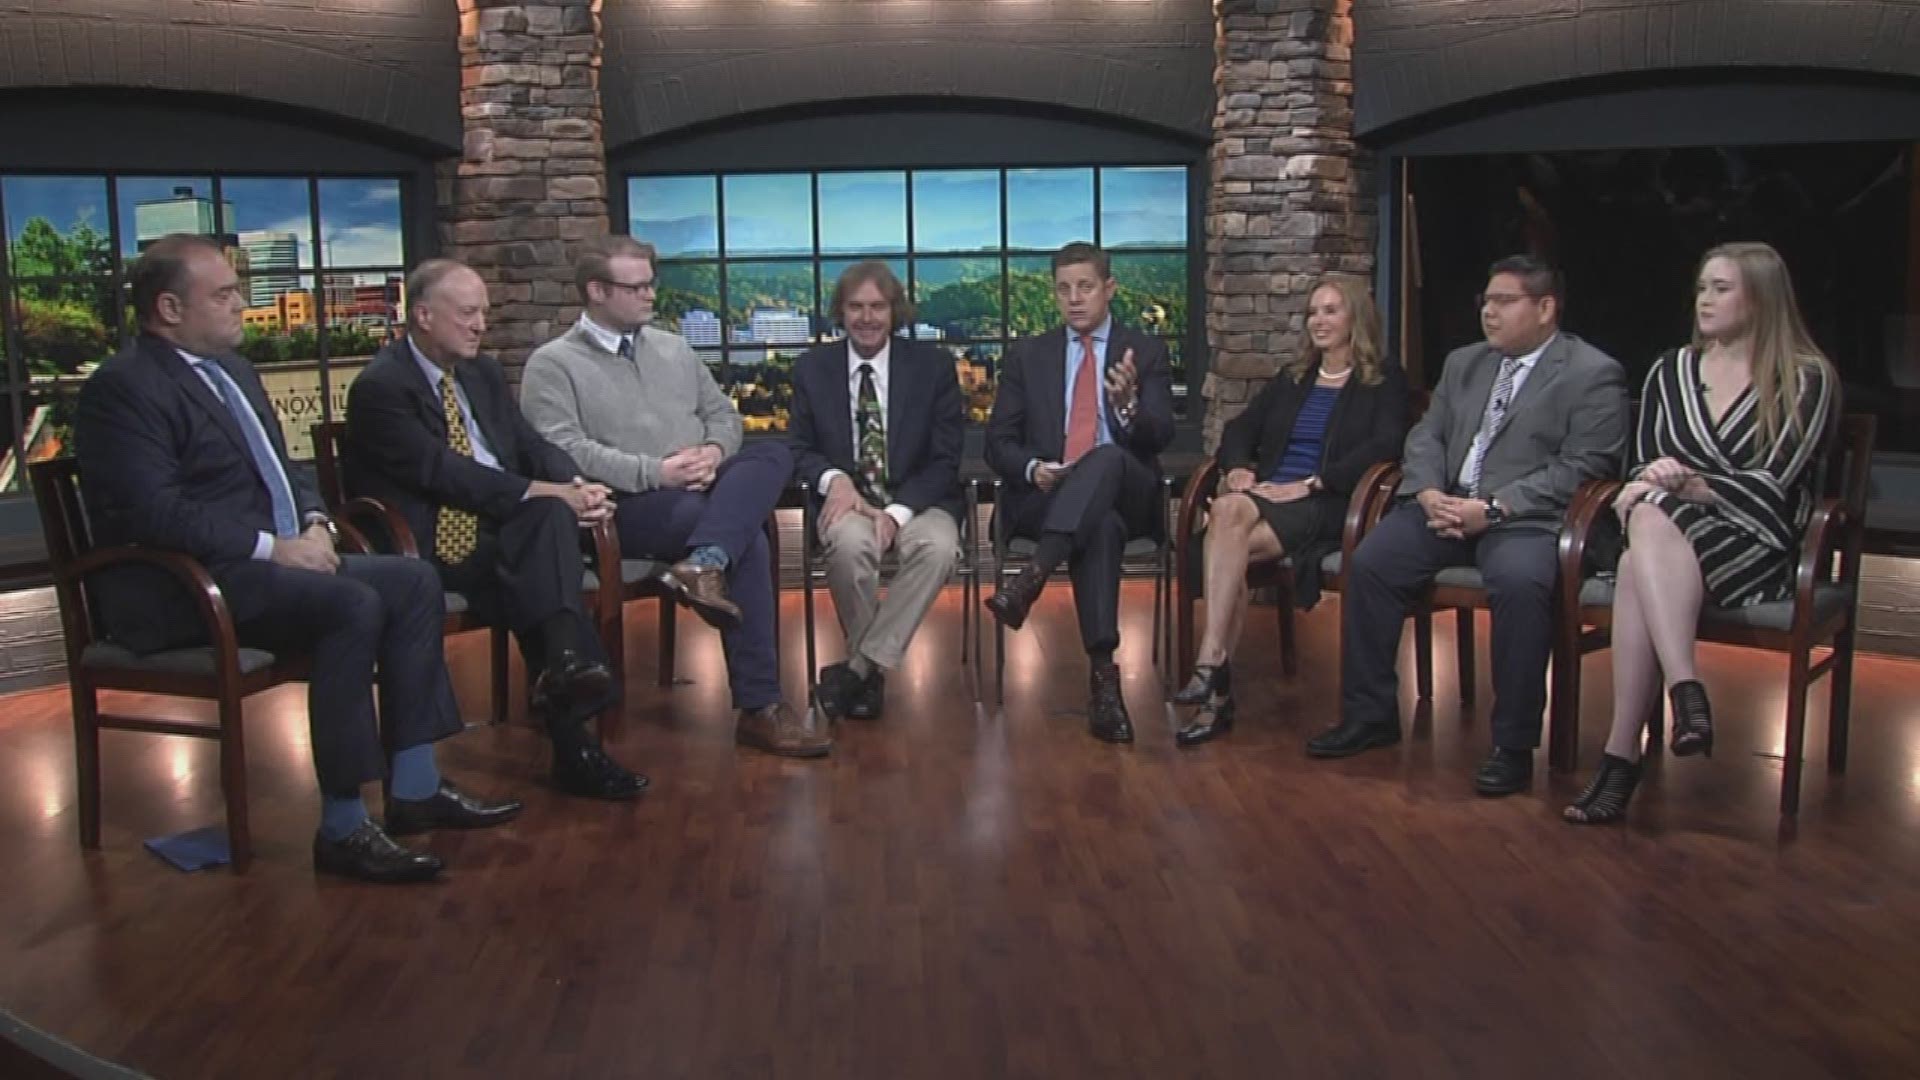 The show's panel of experts analyzes the Nov. 6 midterm election.